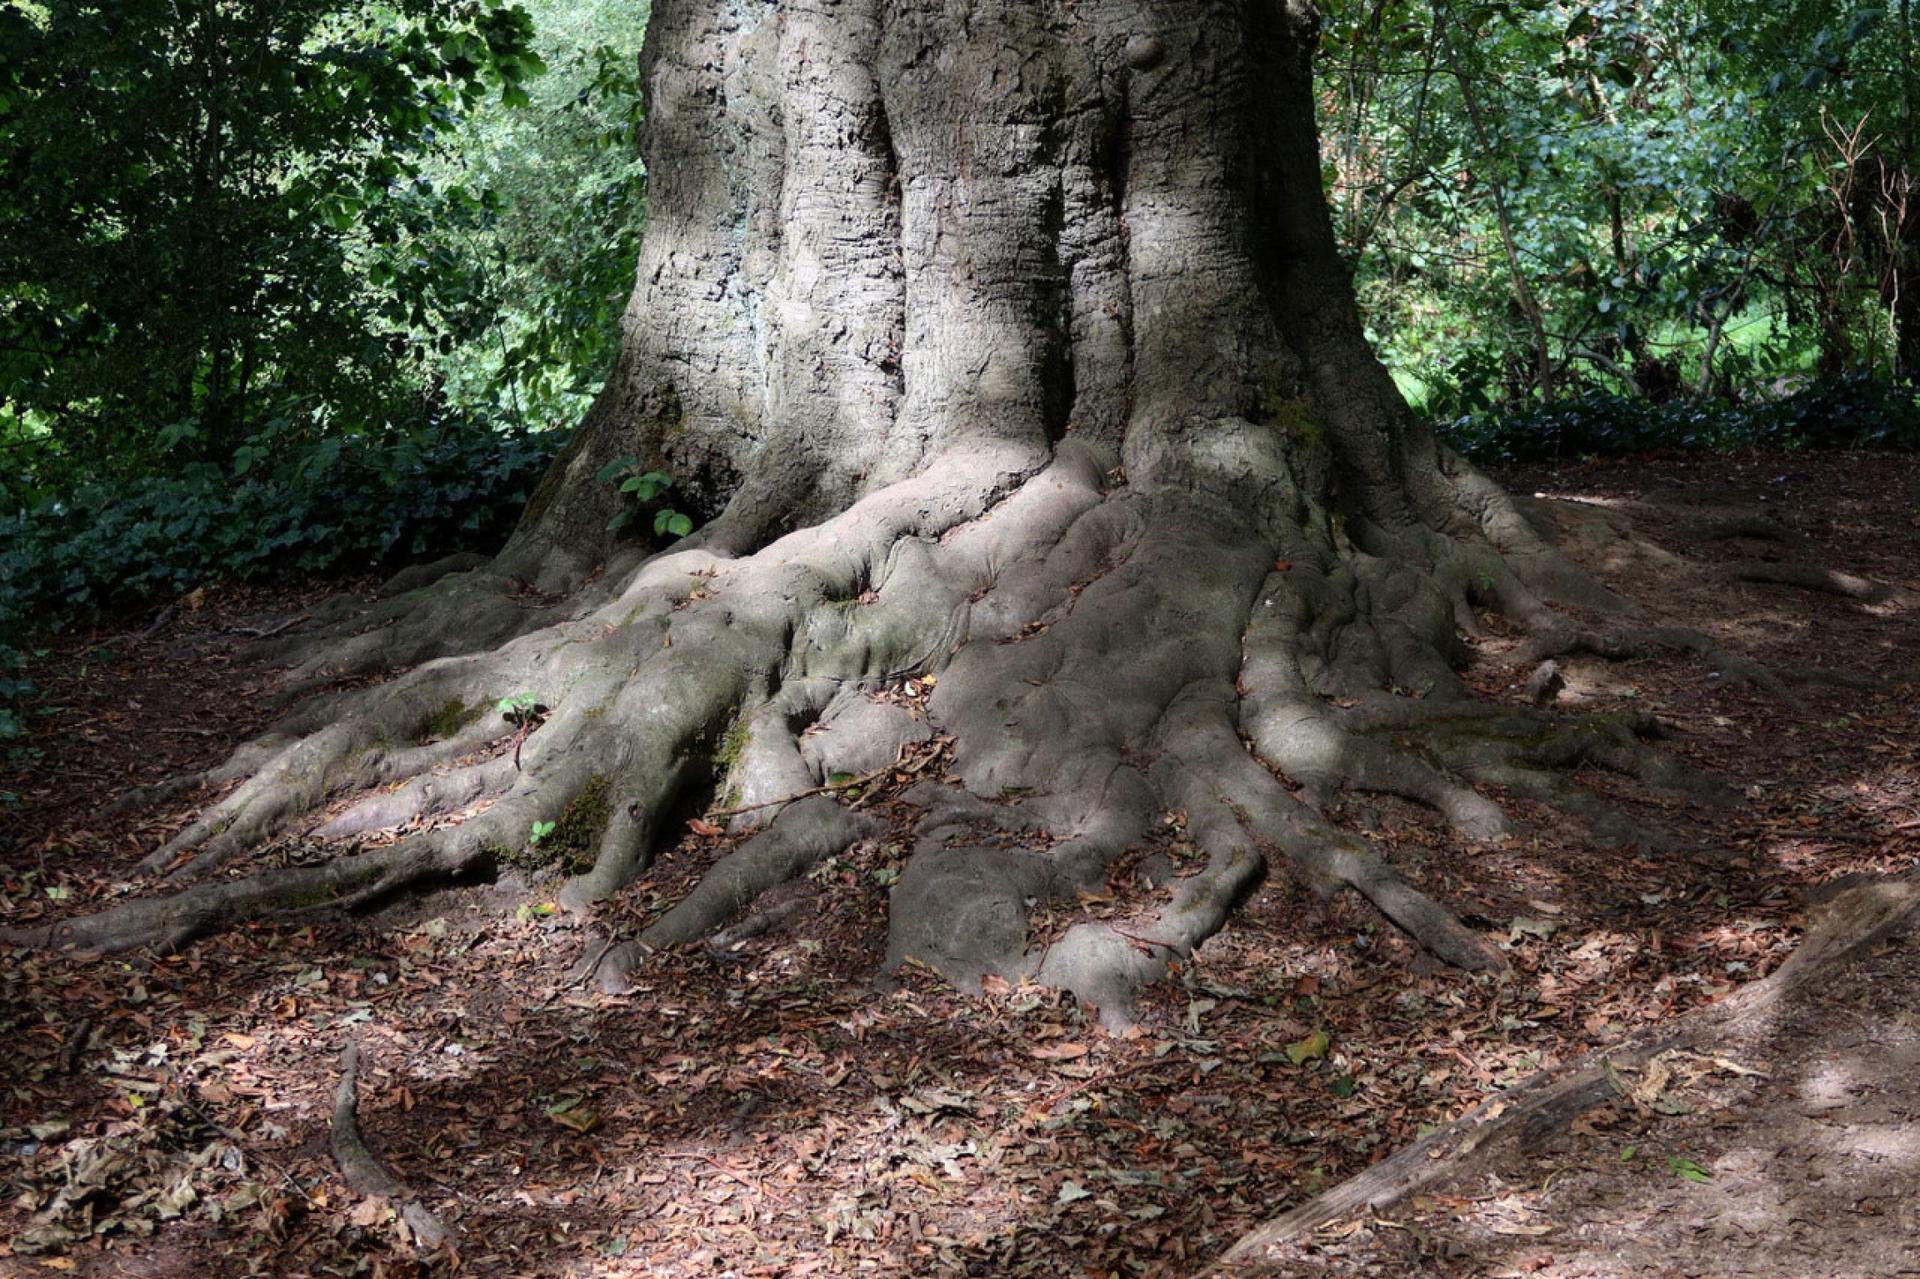 The large trunk of a tree is shown with several of the roots reaching down into the ground.